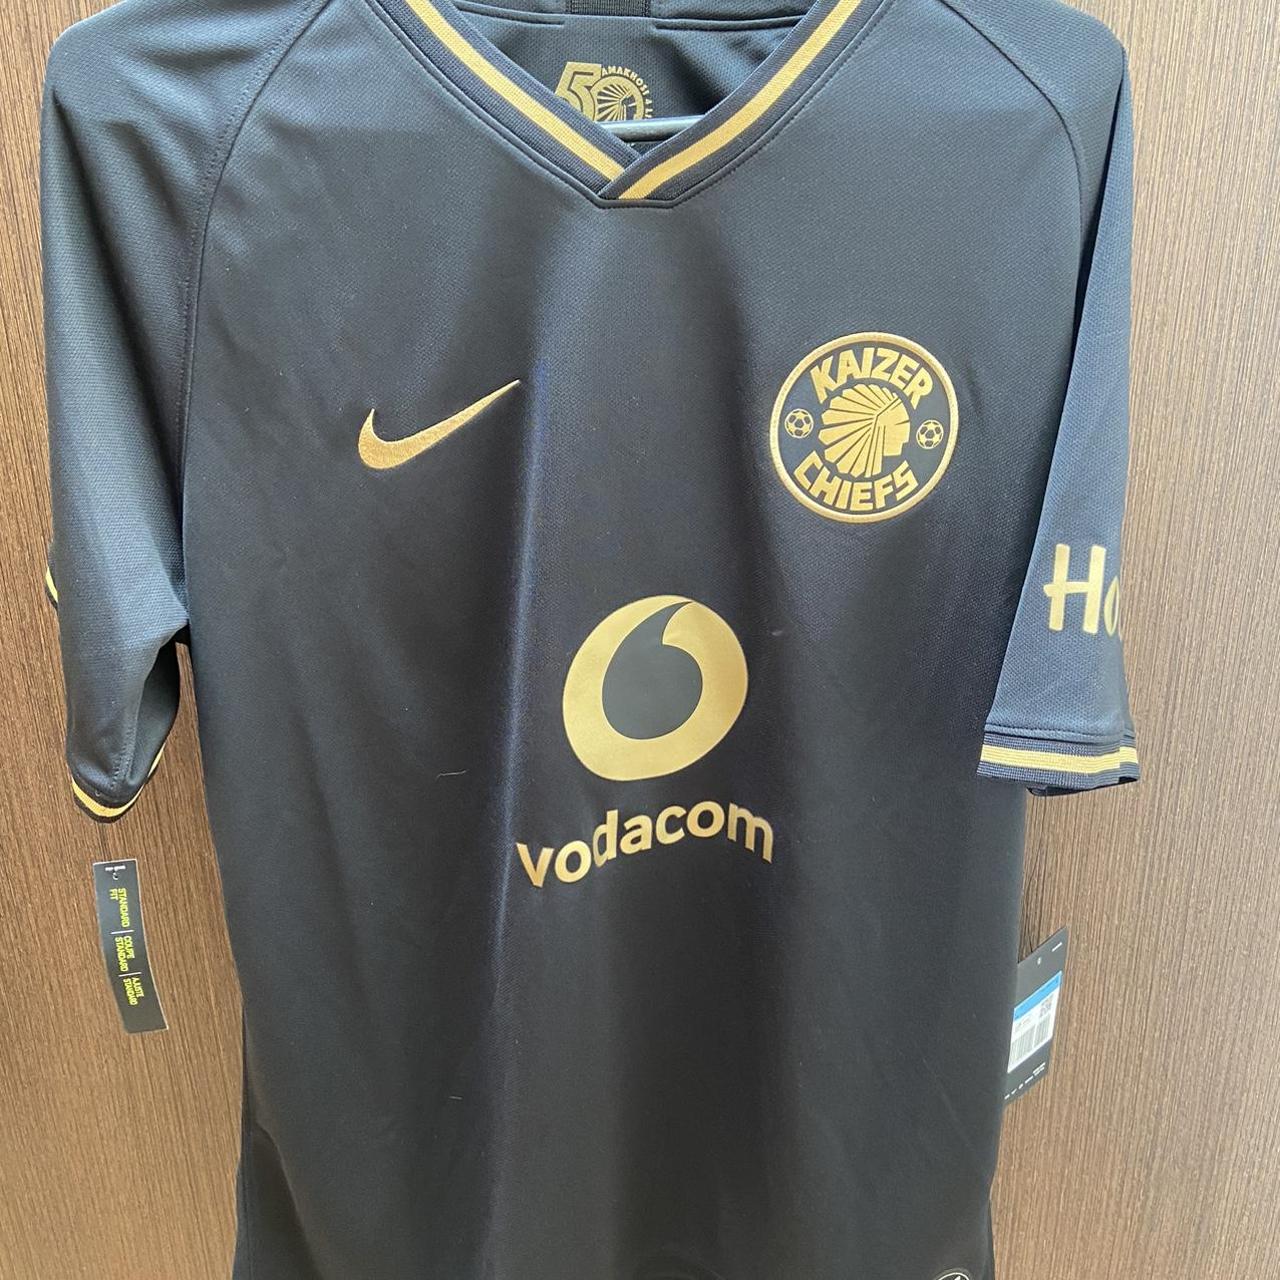 Kaizer Chiefs 50th anniversary jersey sold out